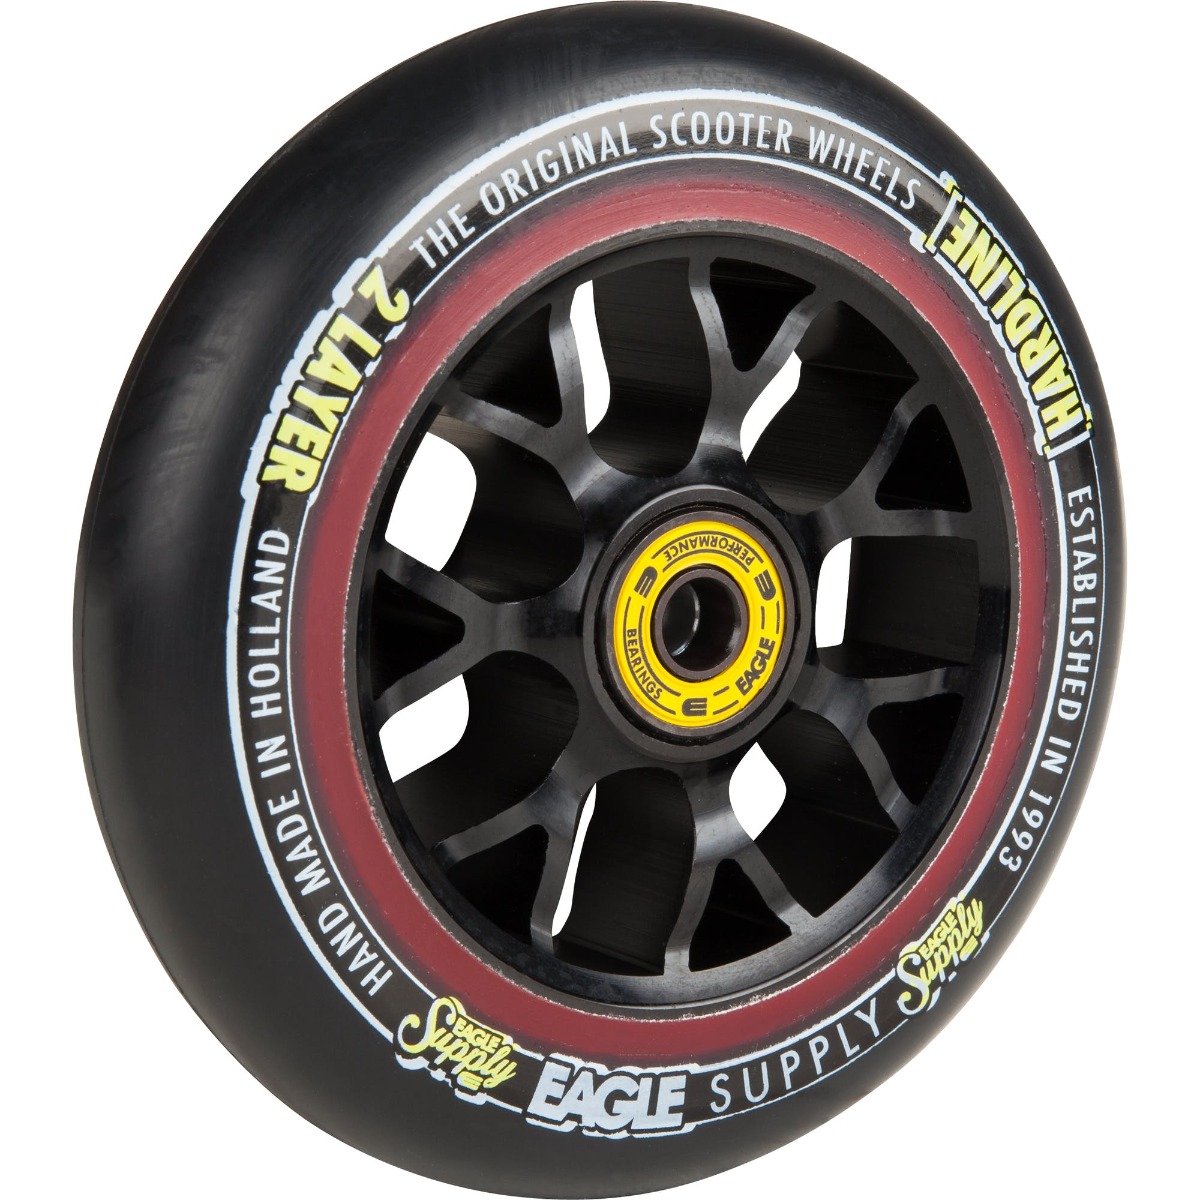 An image of Eagle Supply 115mm Hardline 2-Layer X6 Panthers Scooter Wheel - Black